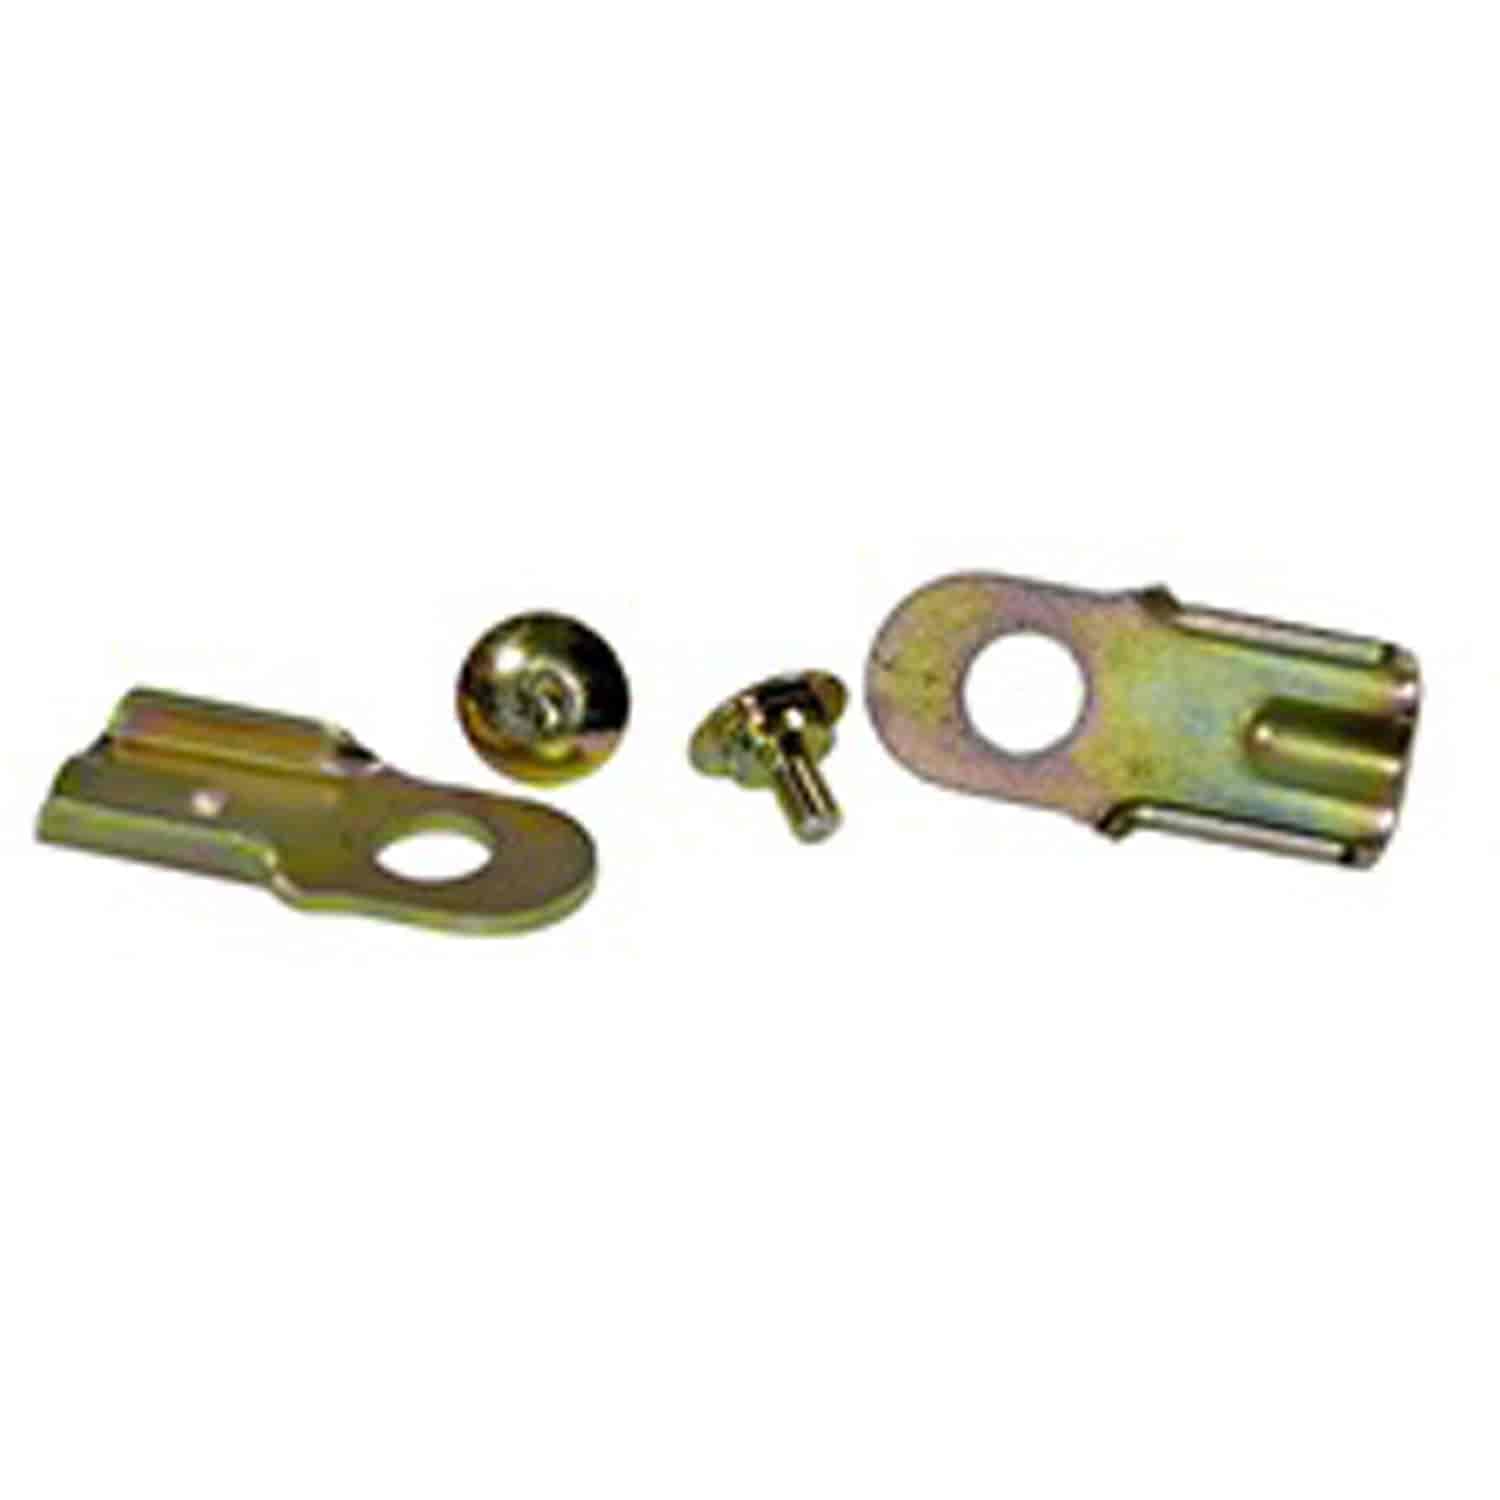 pair of replacement tailgate latch brackets from Omix-ADA